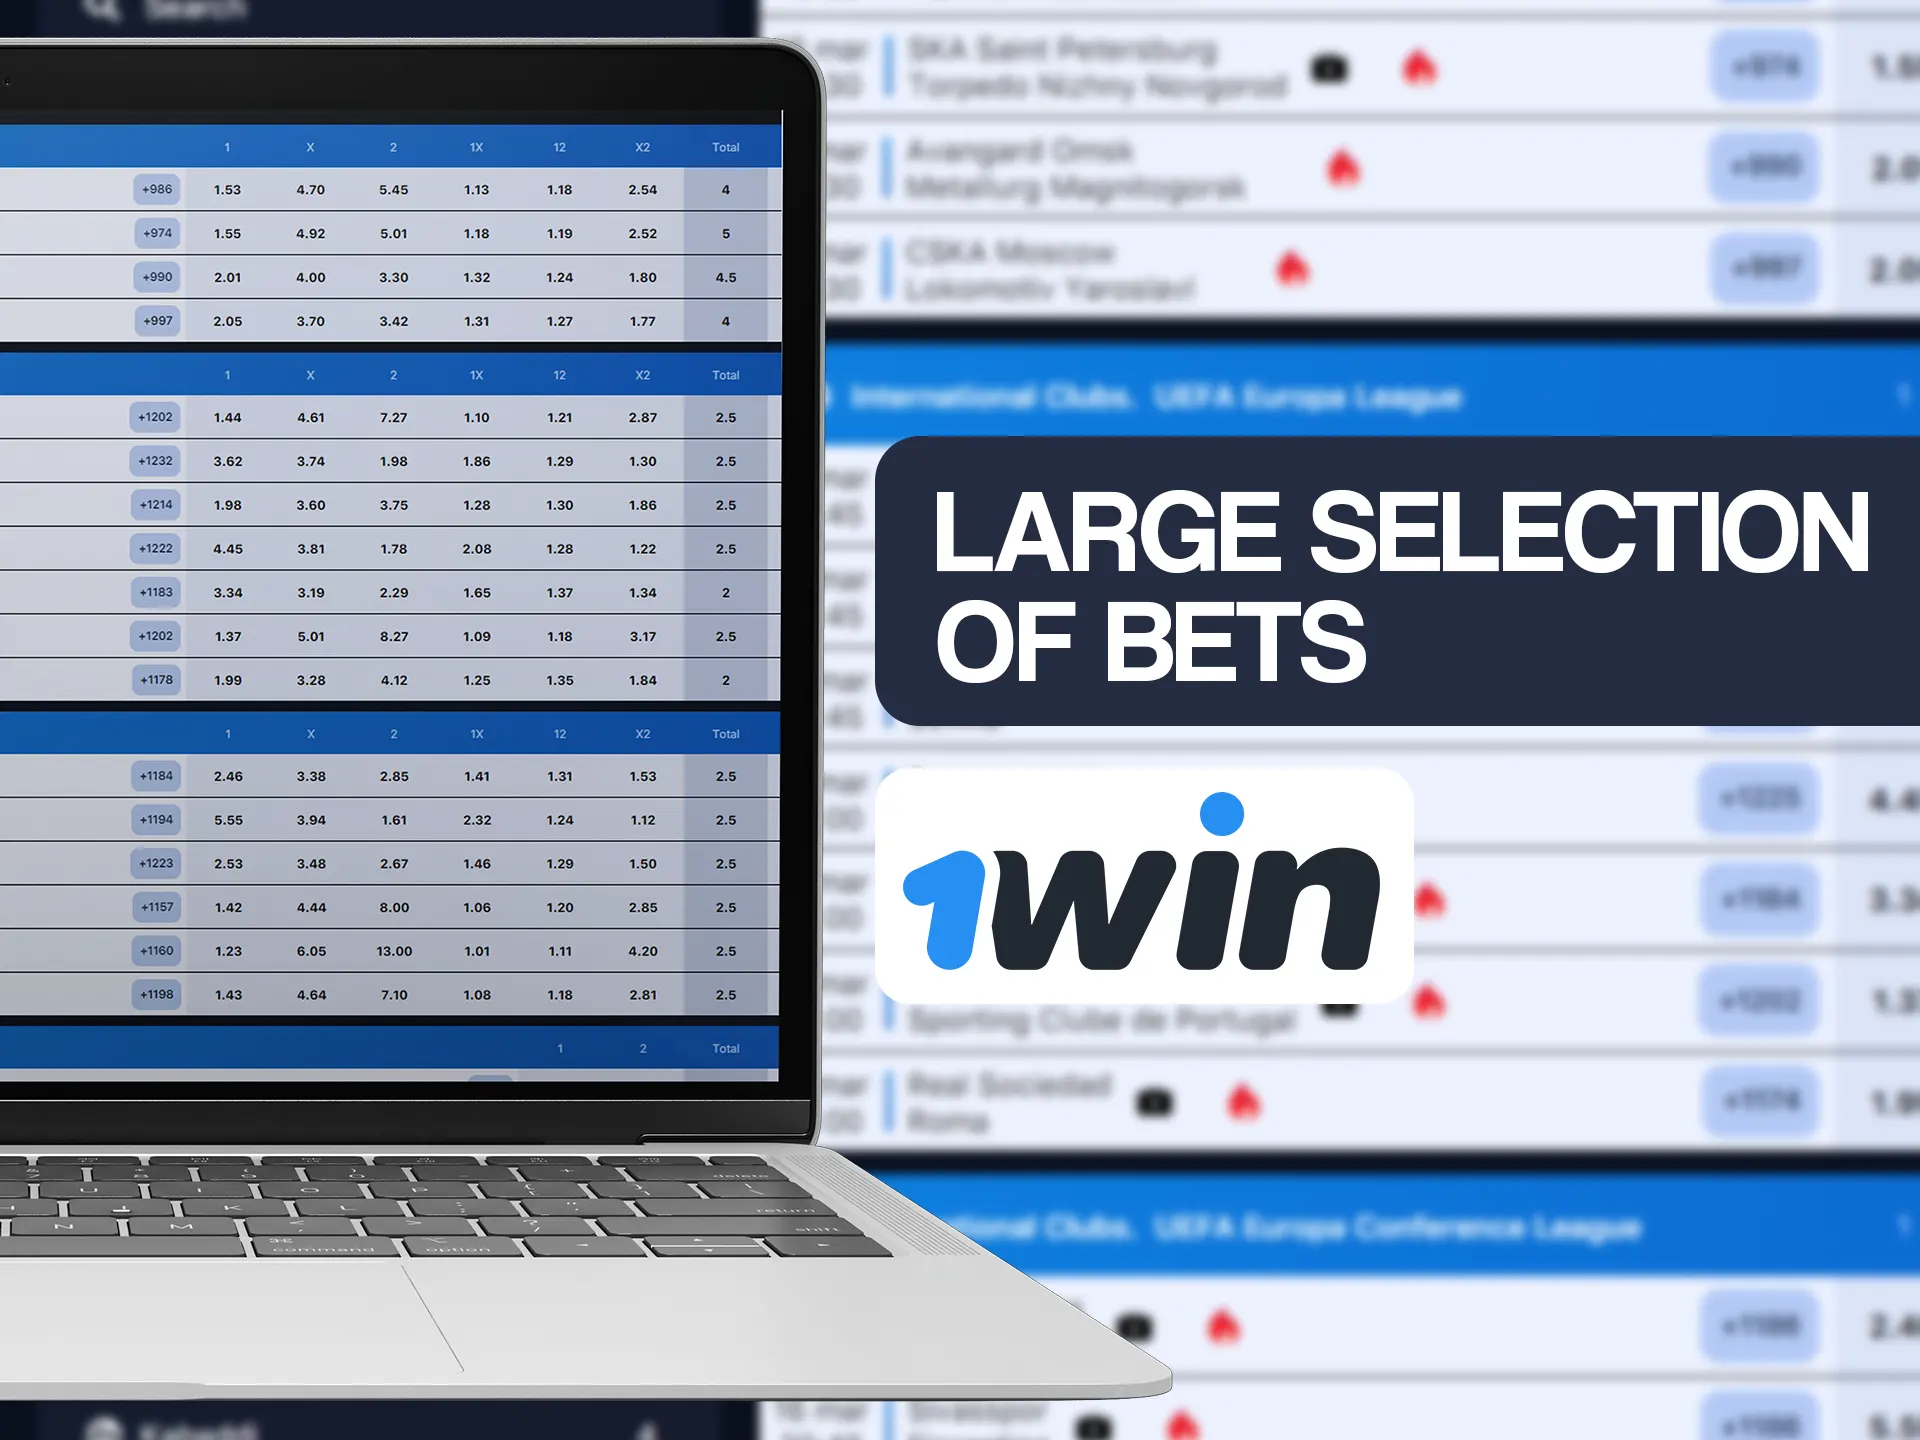 Make your own bet at 1win.